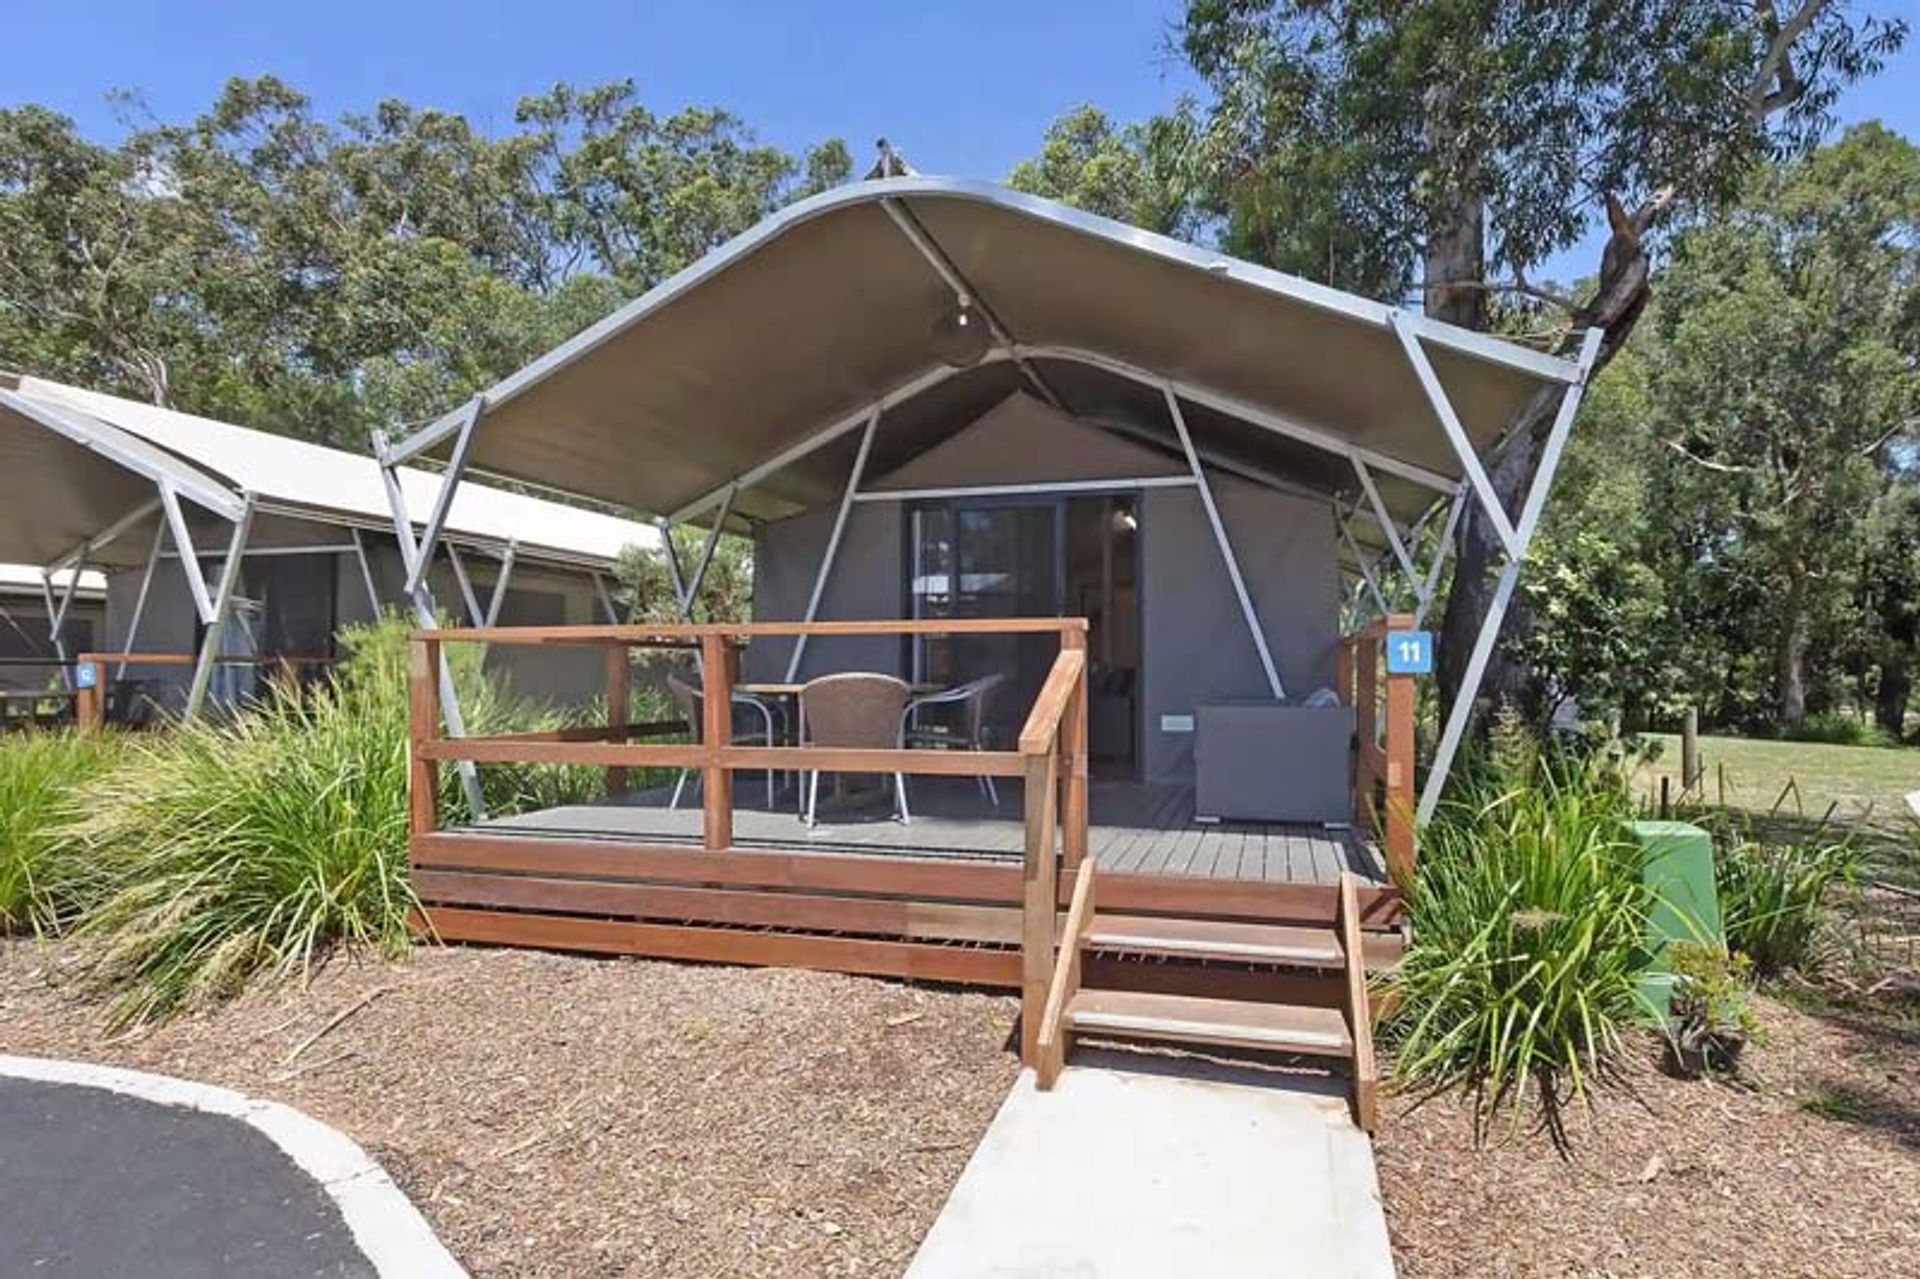 Jimmys Beach Deluxe Tent